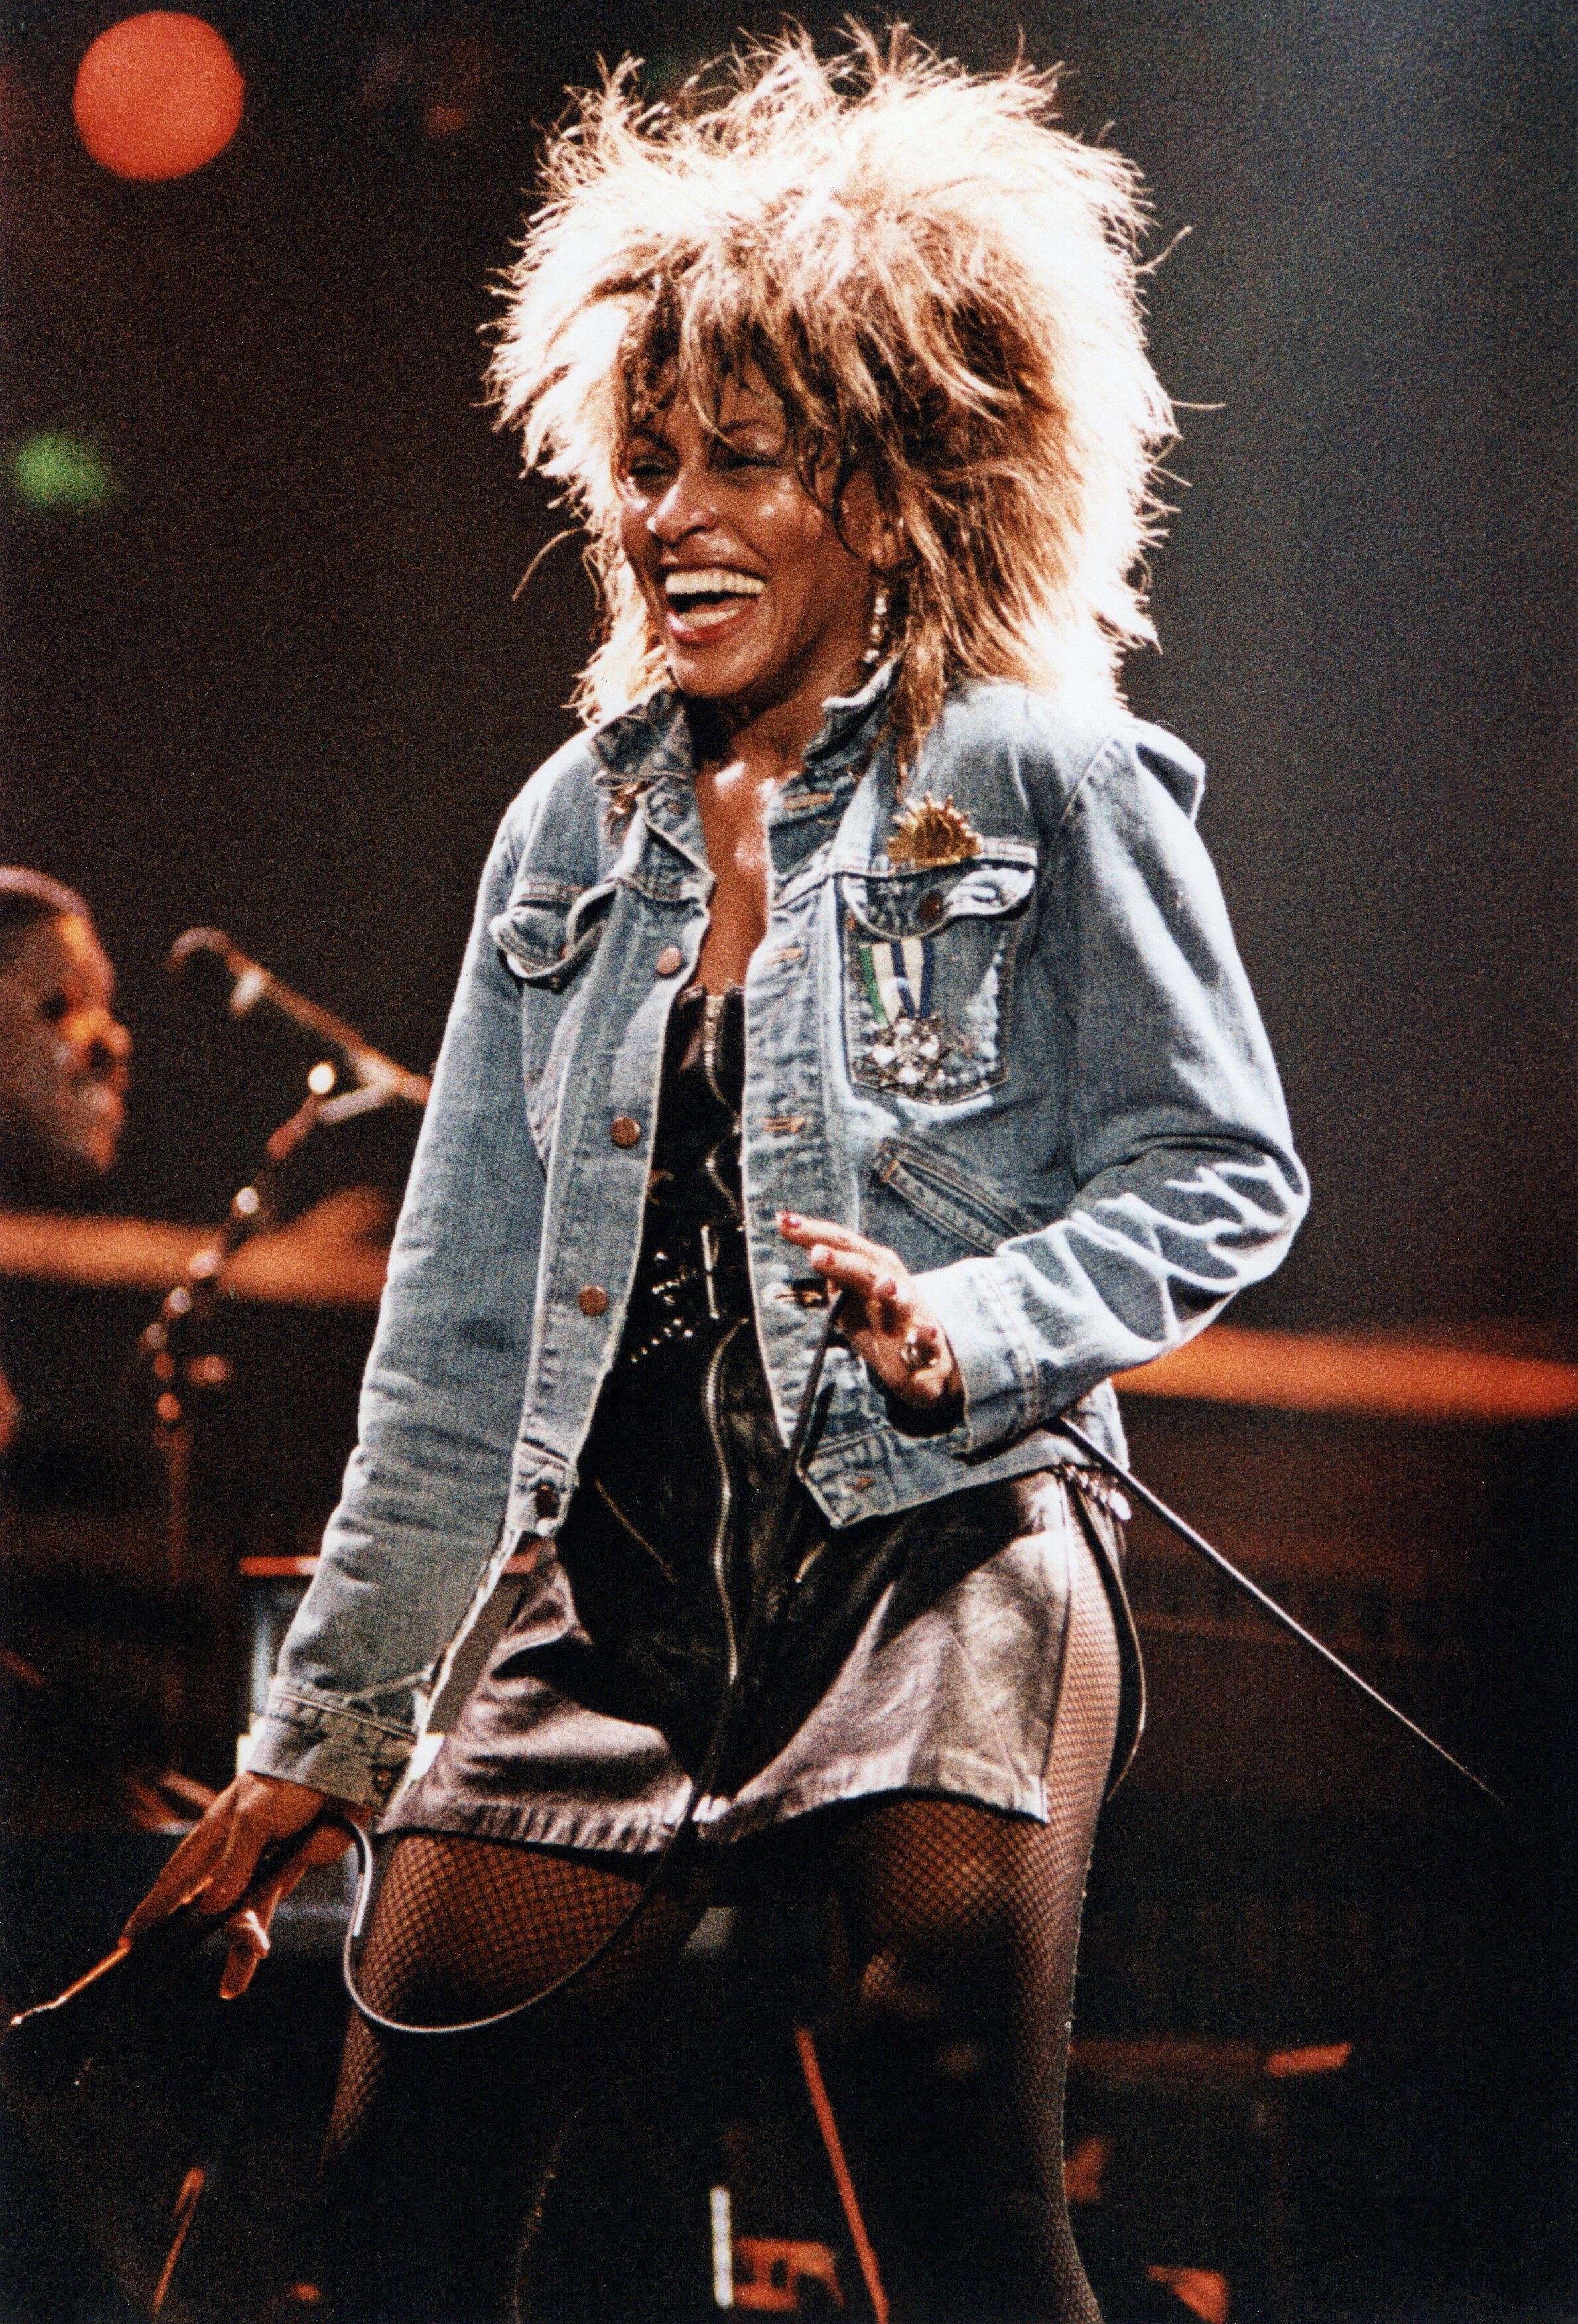 tina performing on stage wearing a leather dress, fishnets, and a denim jacket